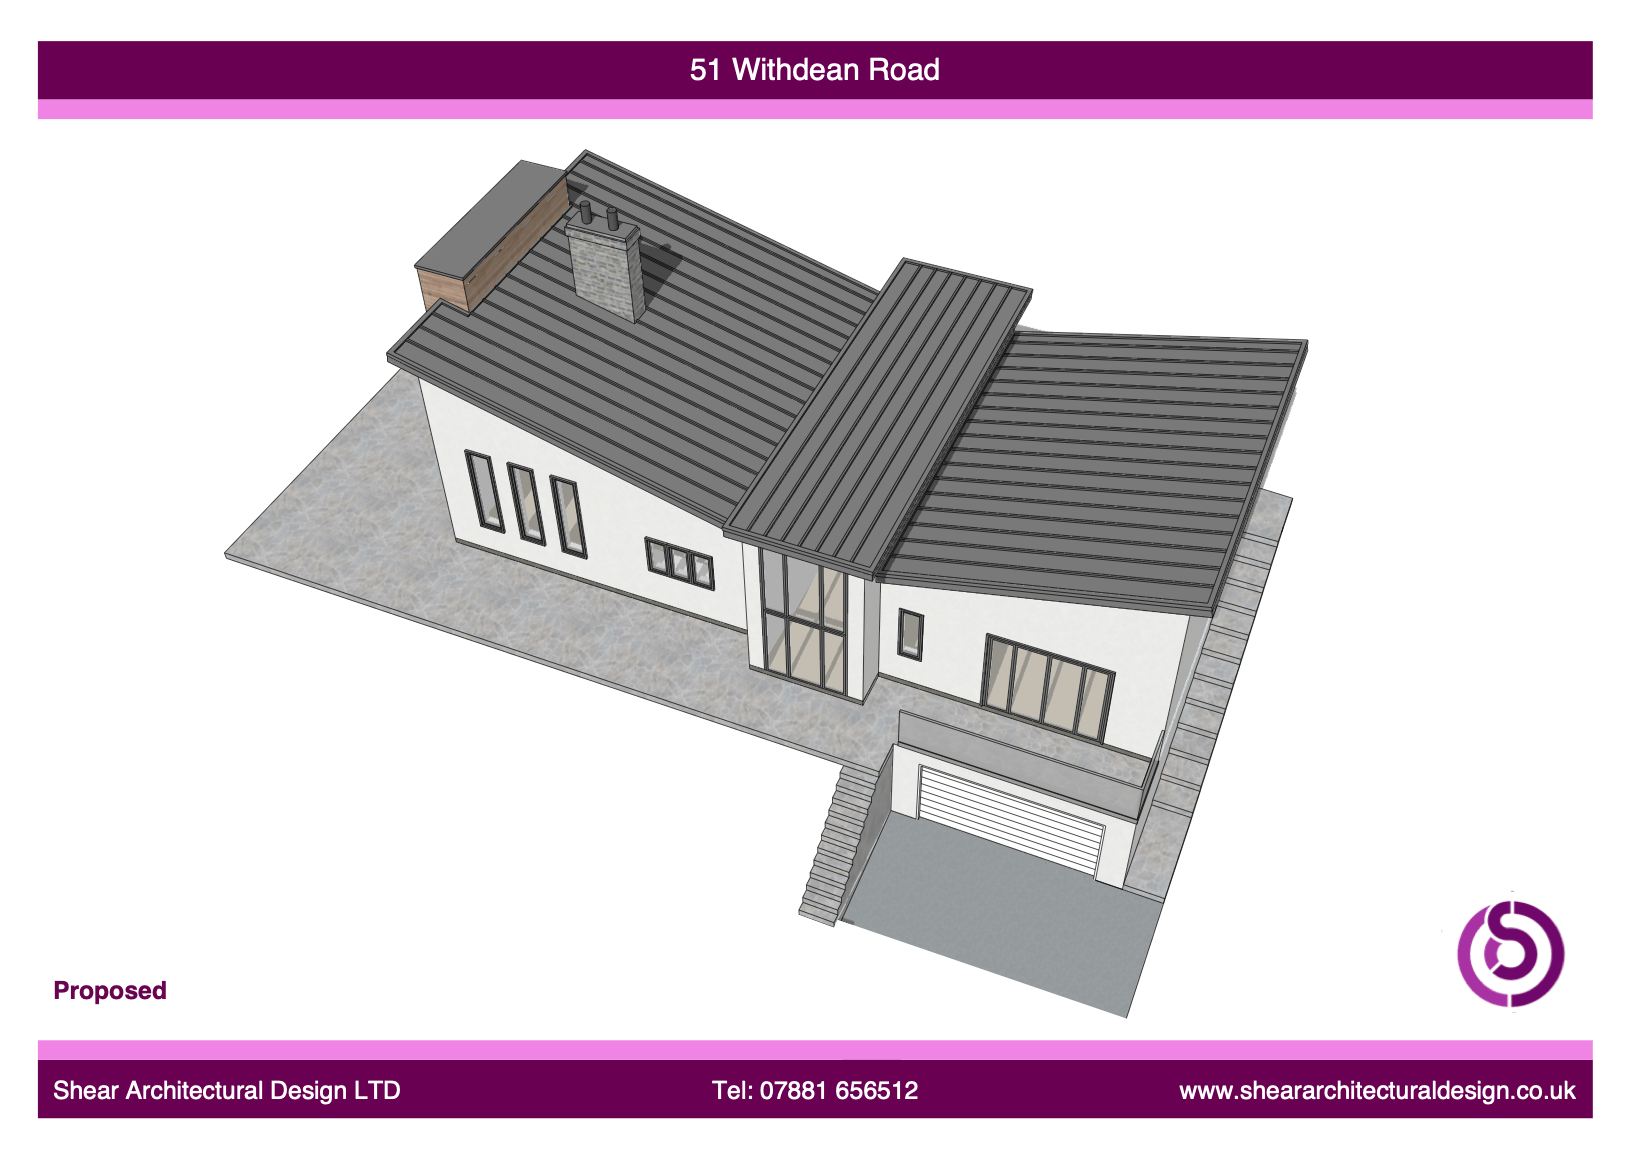 Contemporary new build house with zinc gull-wing roof, vaulted ceilings, and scenic view of Withdean Stadium.